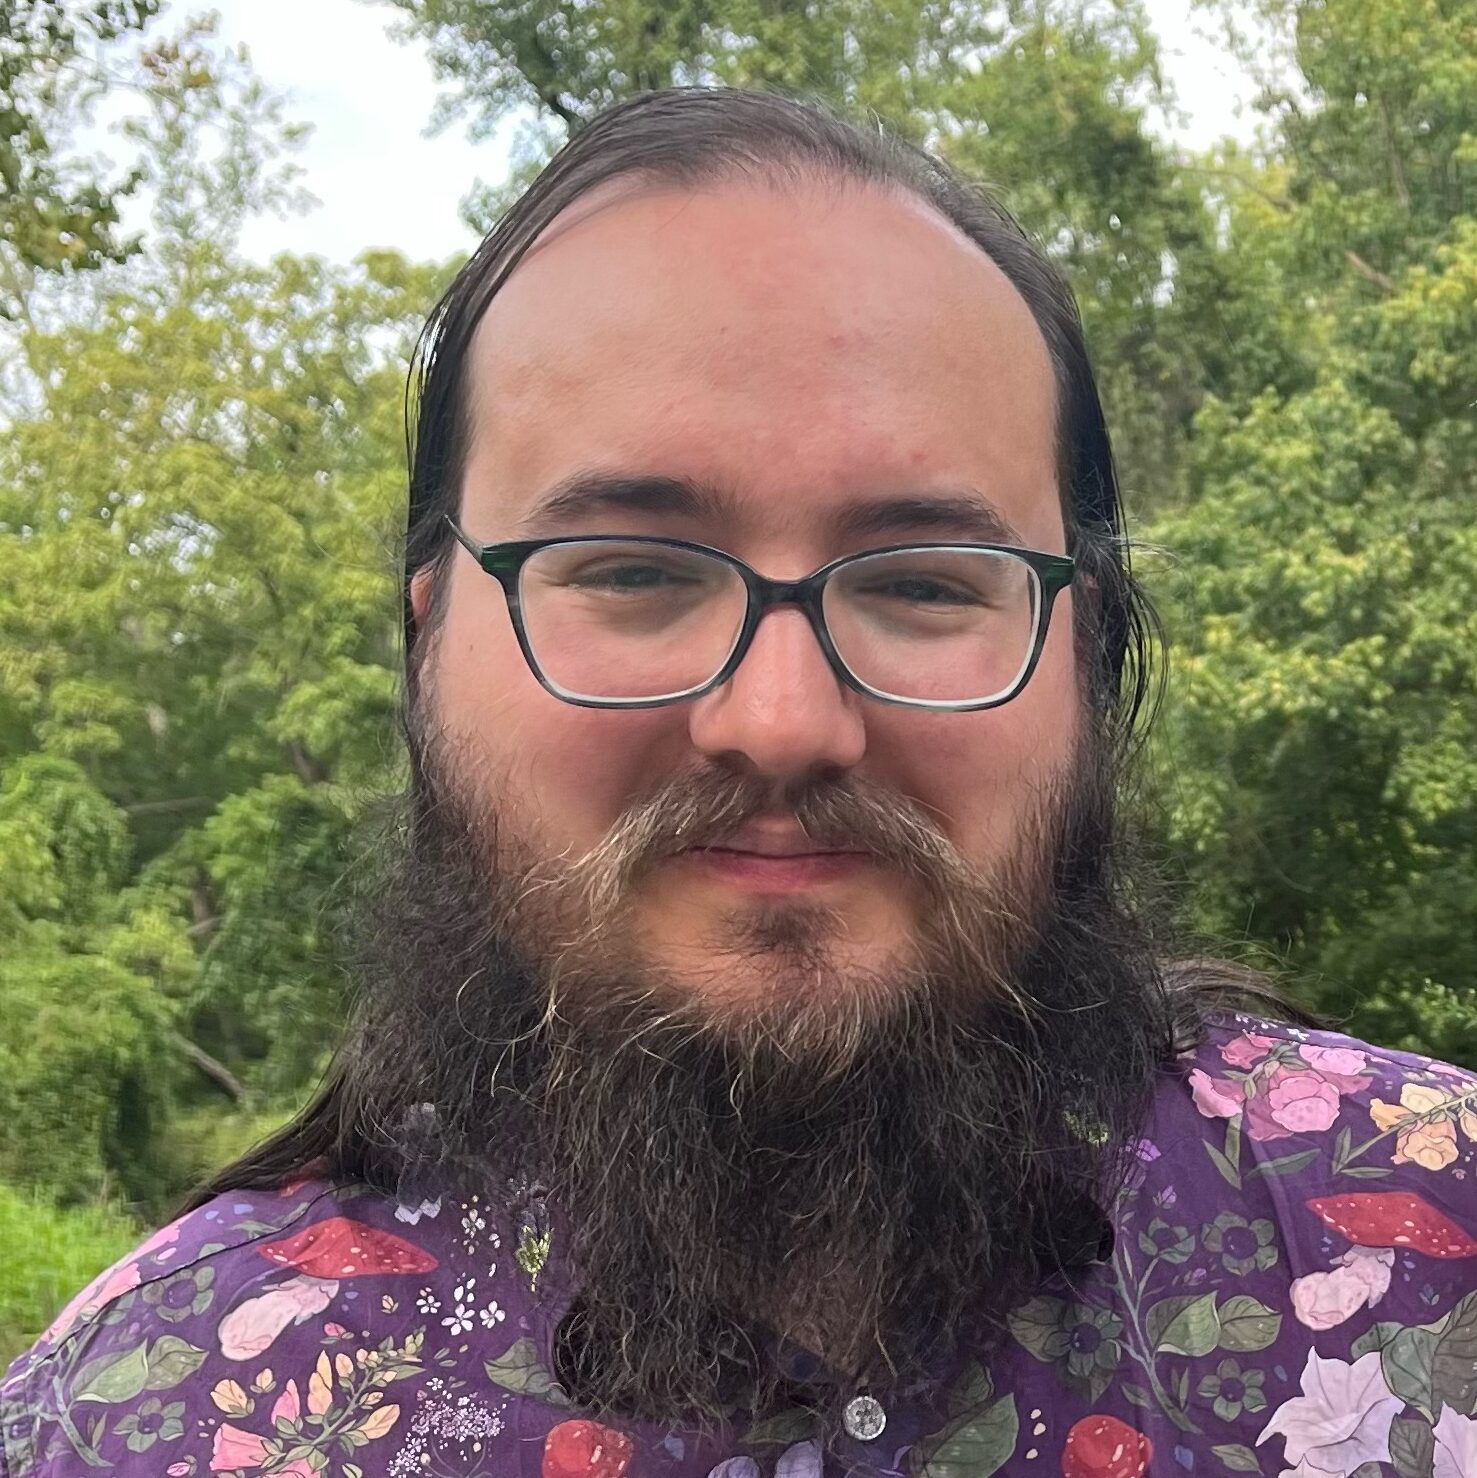 Conor Murphy has a long beard, glasses, and a purple flowered shirt.